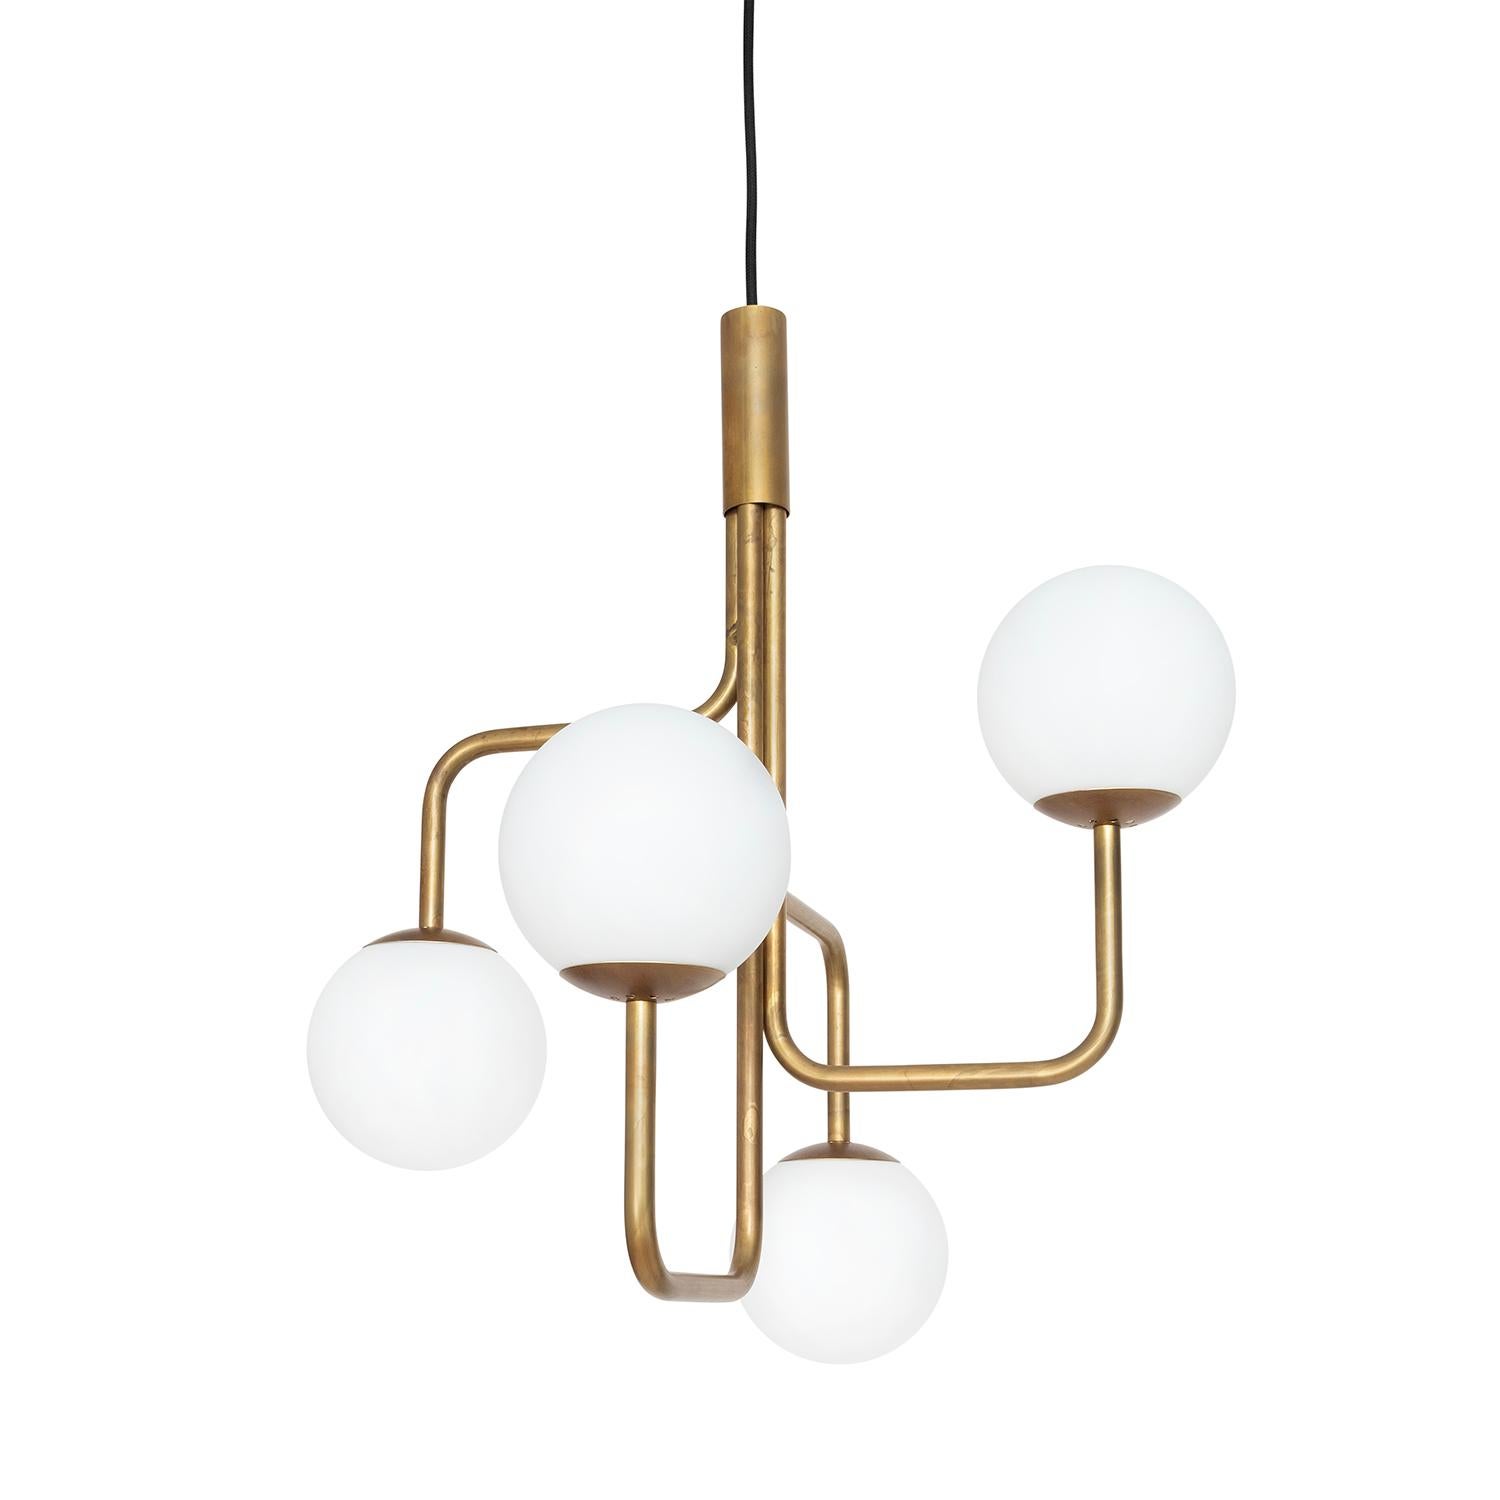 Sabina Grubbeson Strapatz Glob Brass Ceiling Lamp by Konsthantverk In New Condition For Sale In Barcelona, Barcelona